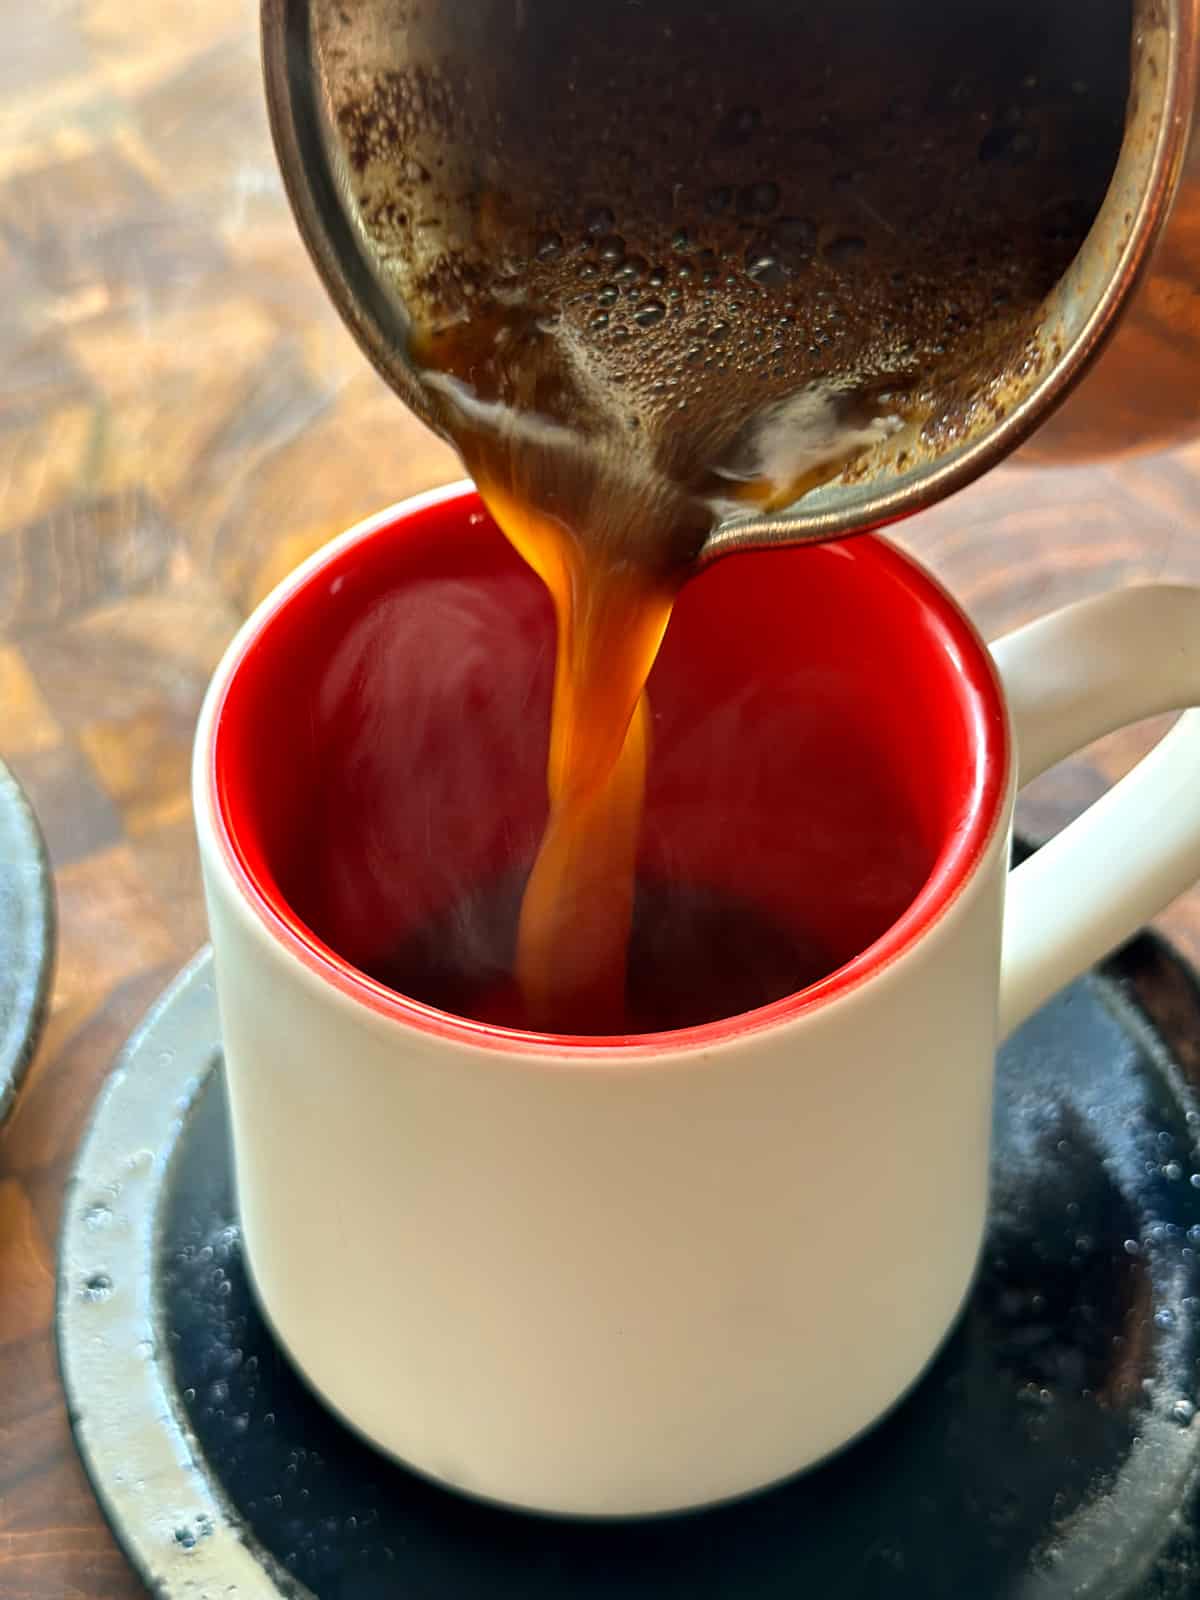 Coffee is poured in a white cup with red walls.